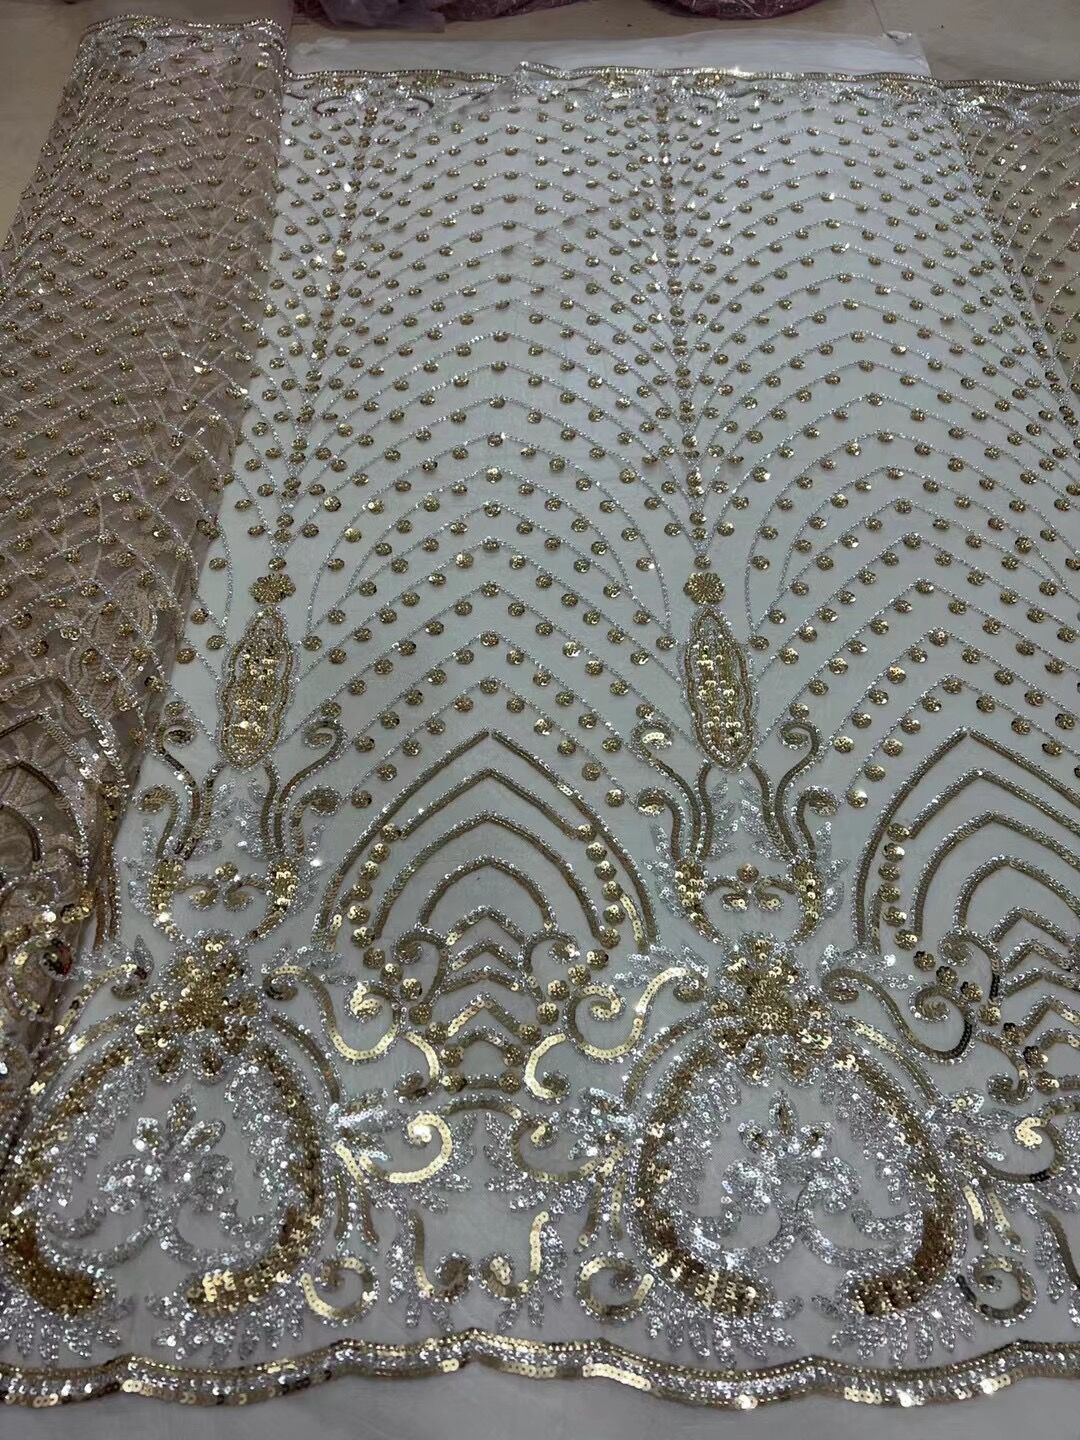 5 YARDS / 15 COLORS / Adélaïde Sequin Beaded Embroidered  Mesh Sparkly Lace Bridal Wedding Party Dress Fabric